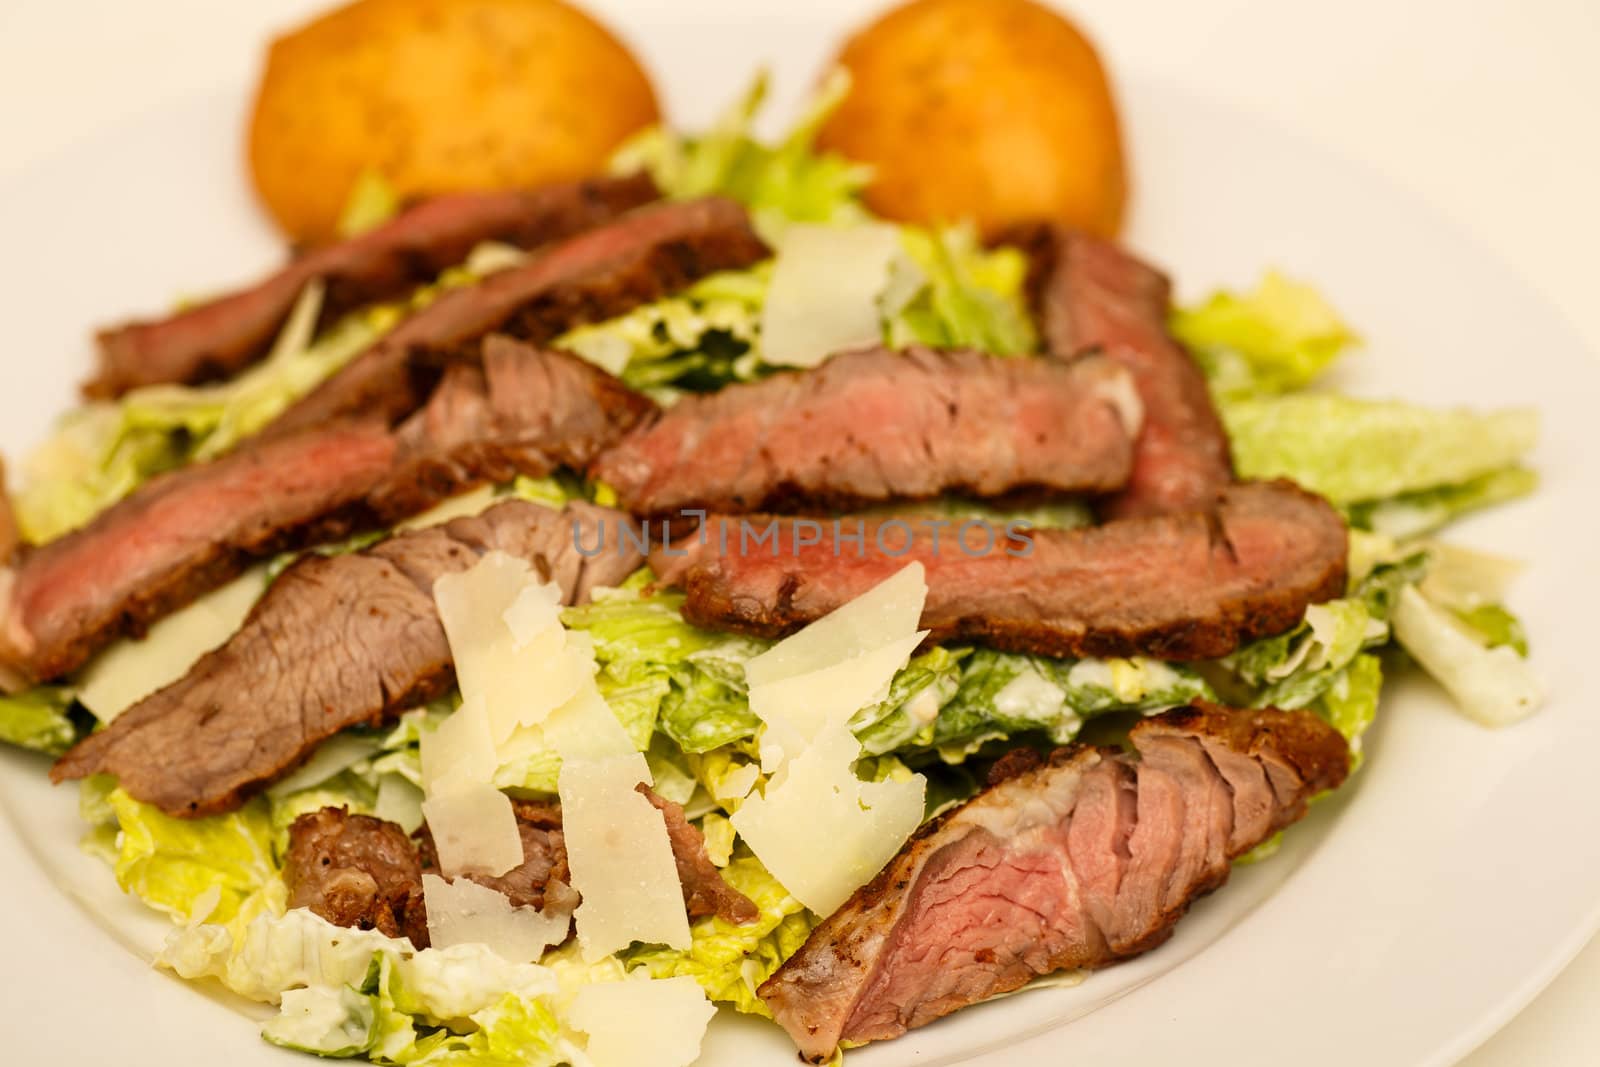 A fresh caesar salad with strips of medium-rare beef and two muffins